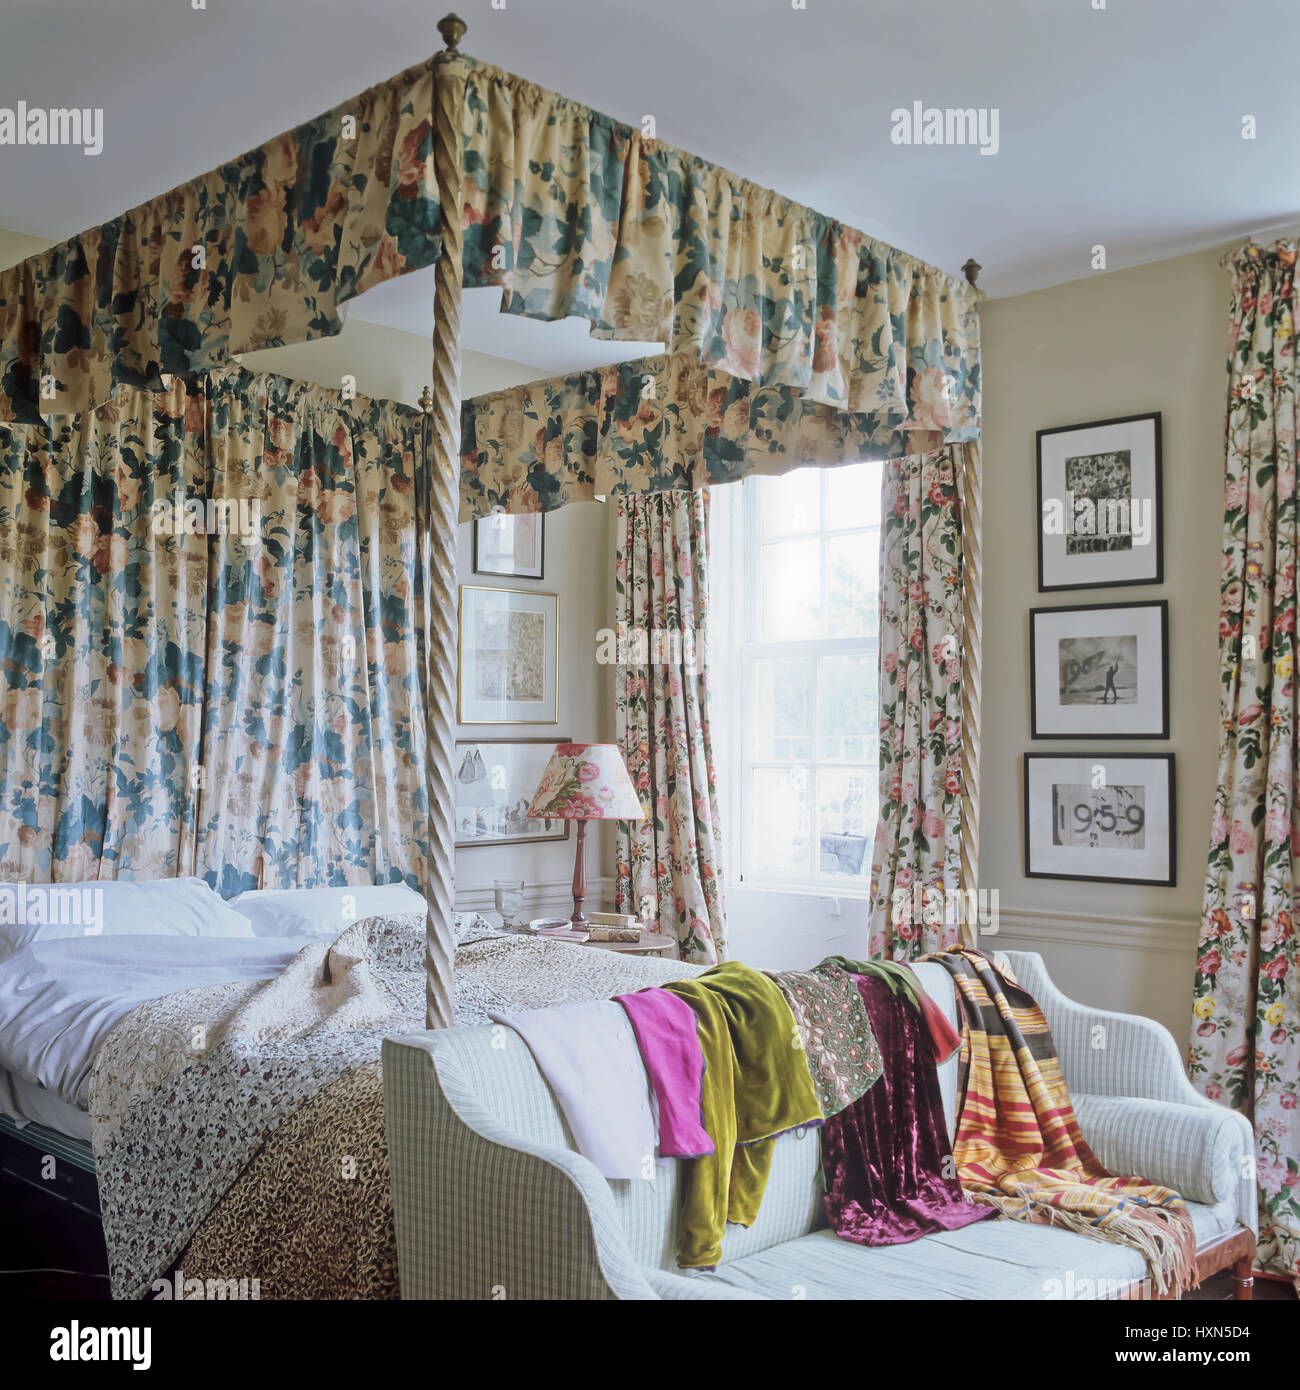 A floral patterned bedroom. Stock Photo